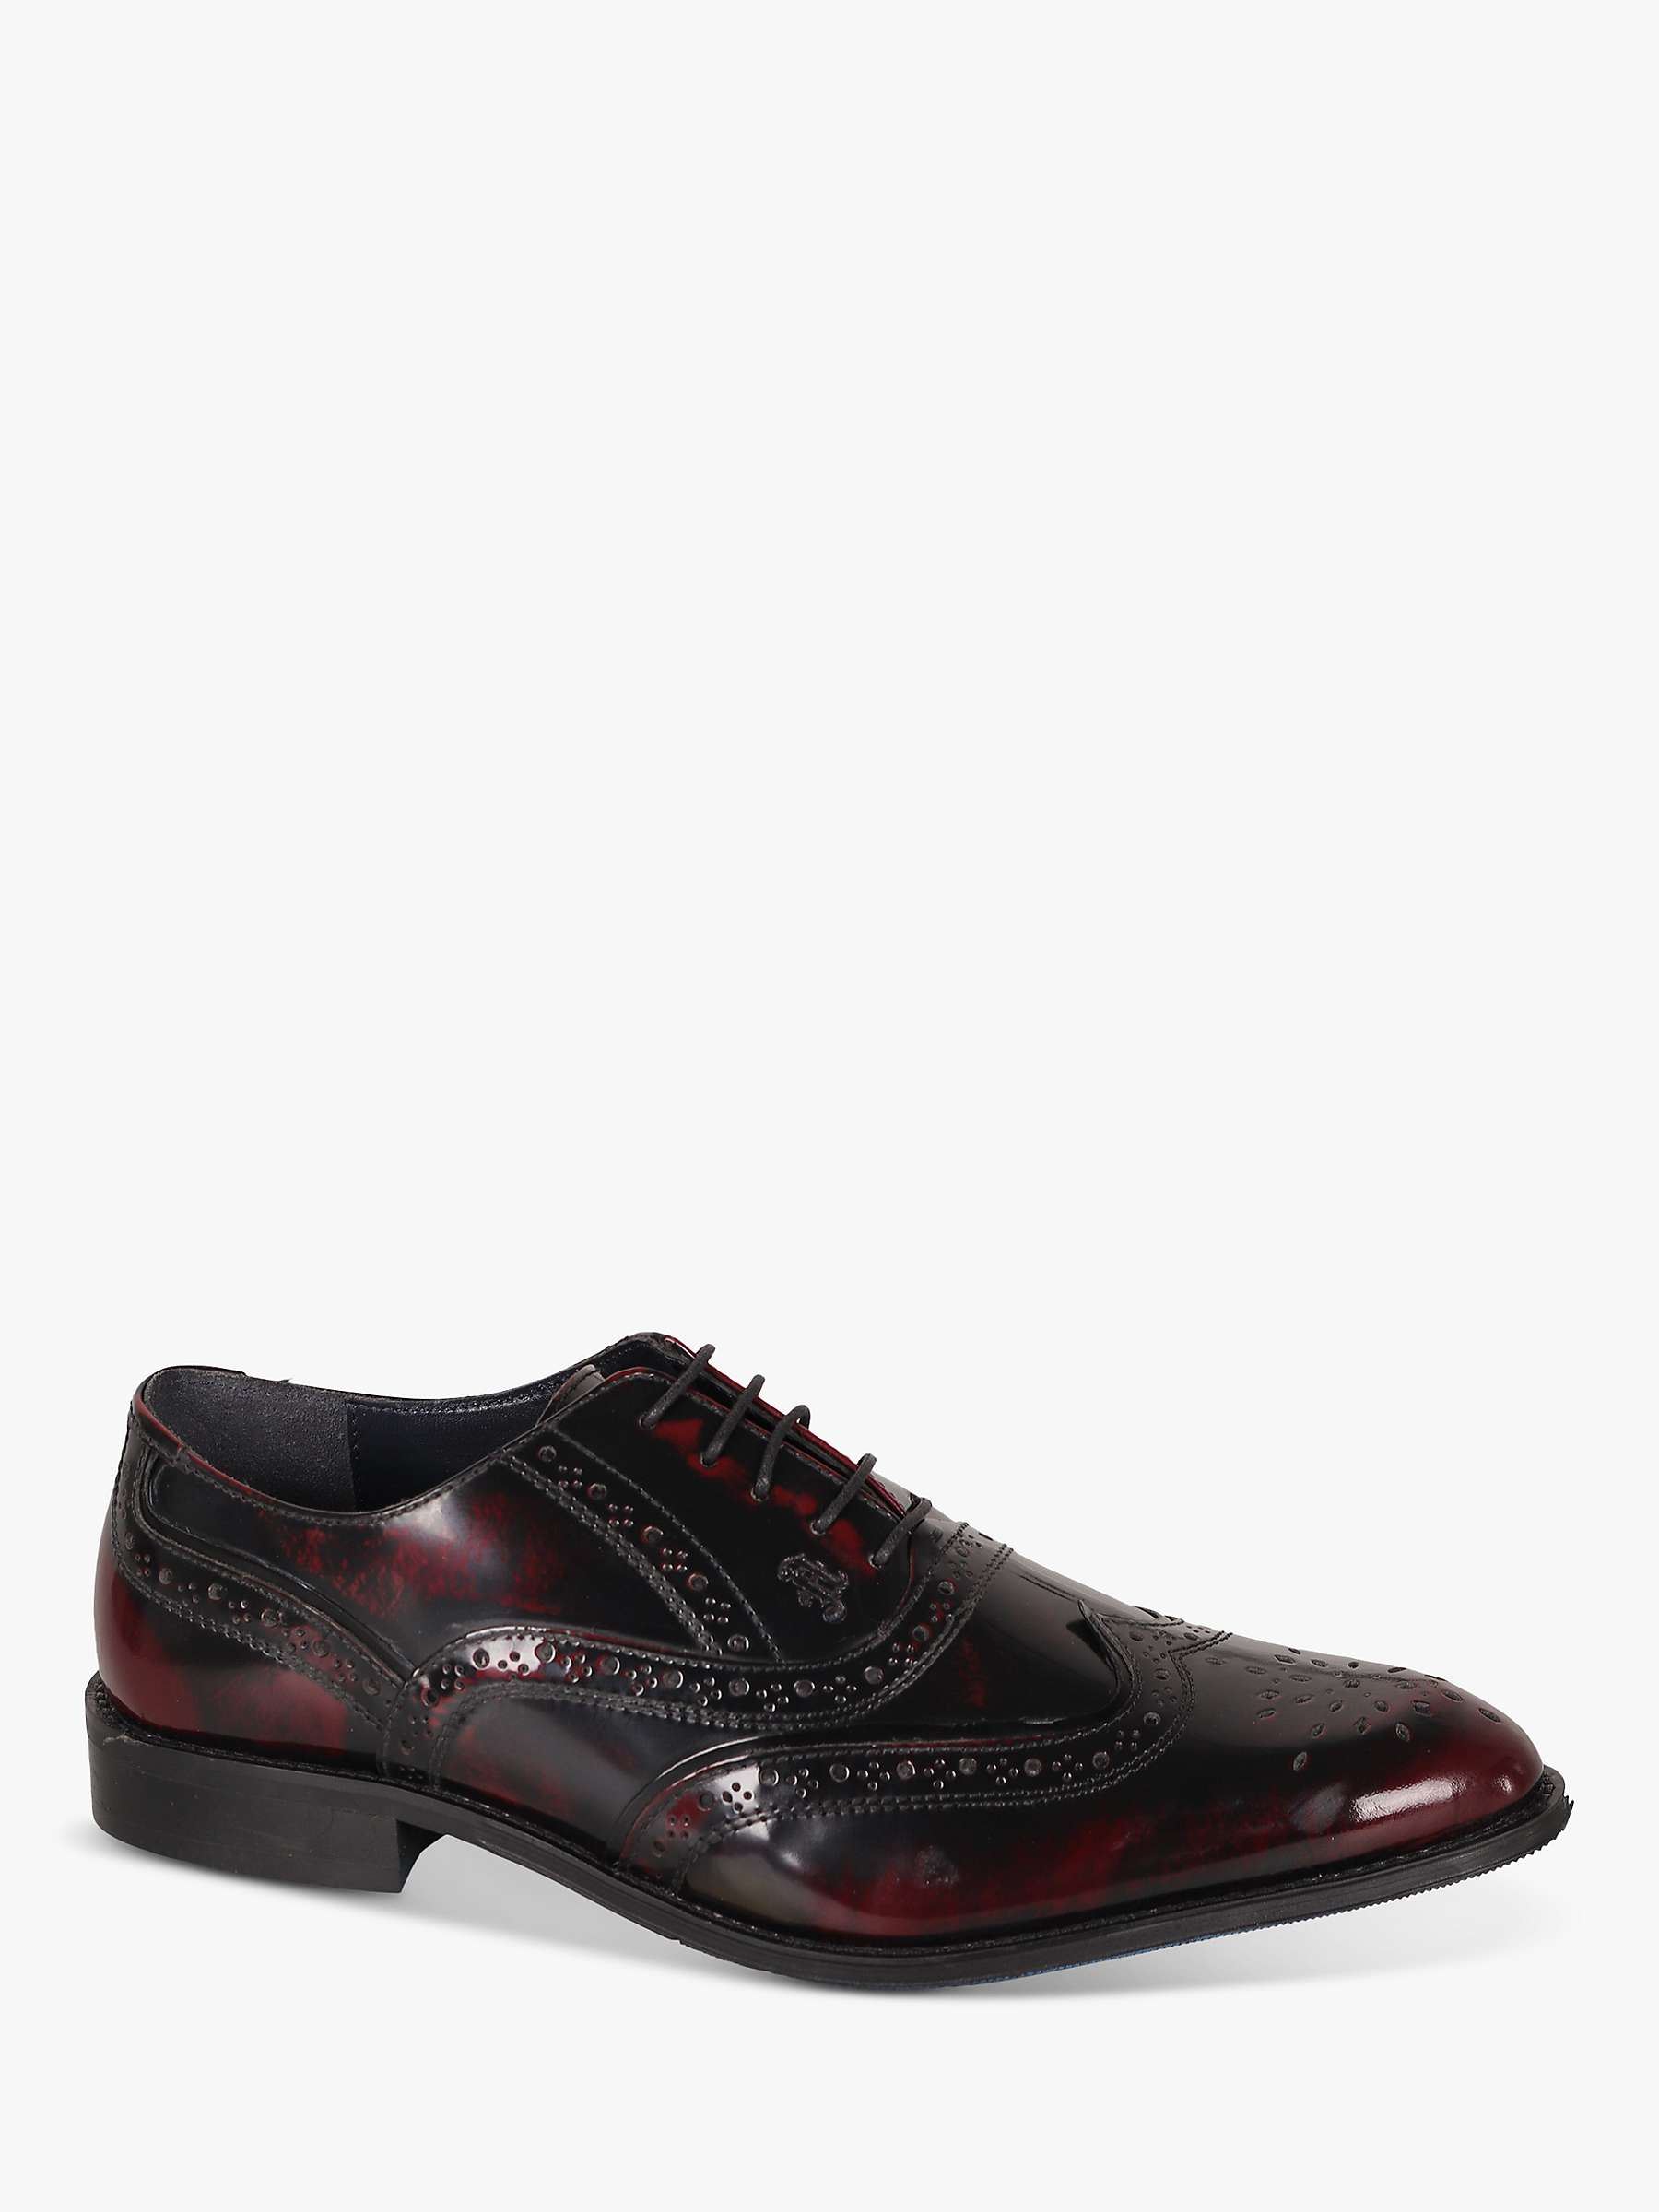 Buy Silver Street London Amen Collection Kilkenny Patent Leather Brogues, Oxblood Online at johnlewis.com